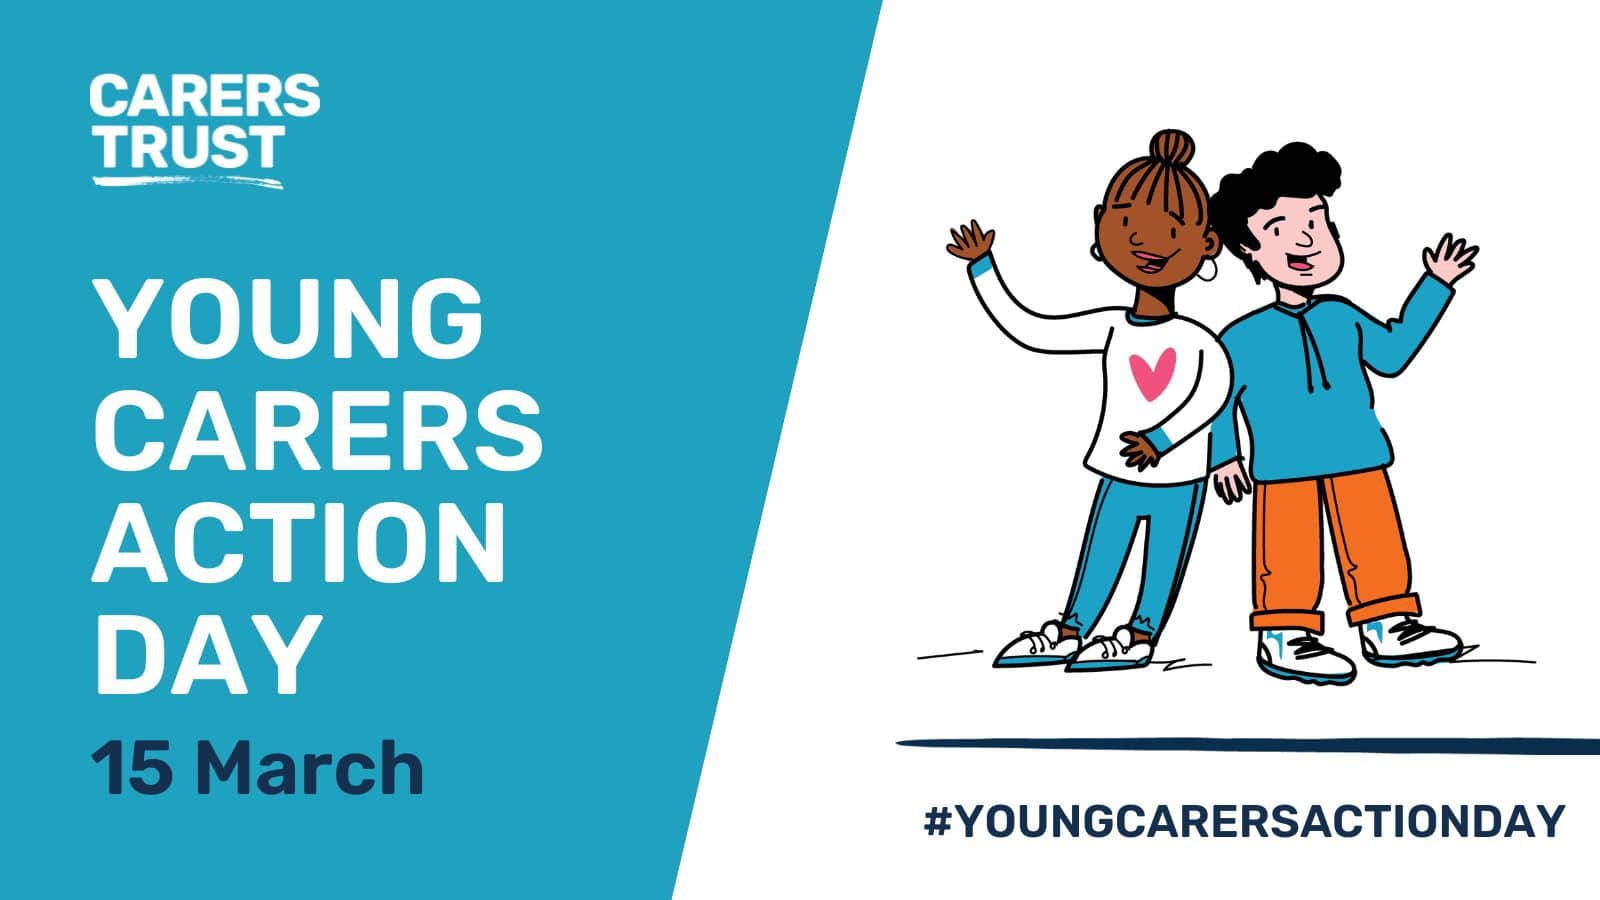 Carers Trust- YCAD graphic. Half blue background with carers trust logo and white text below saying young carers action day and 15 march in blue text, On left hand side, two young people characters are smiling and waving with #you carers action day below